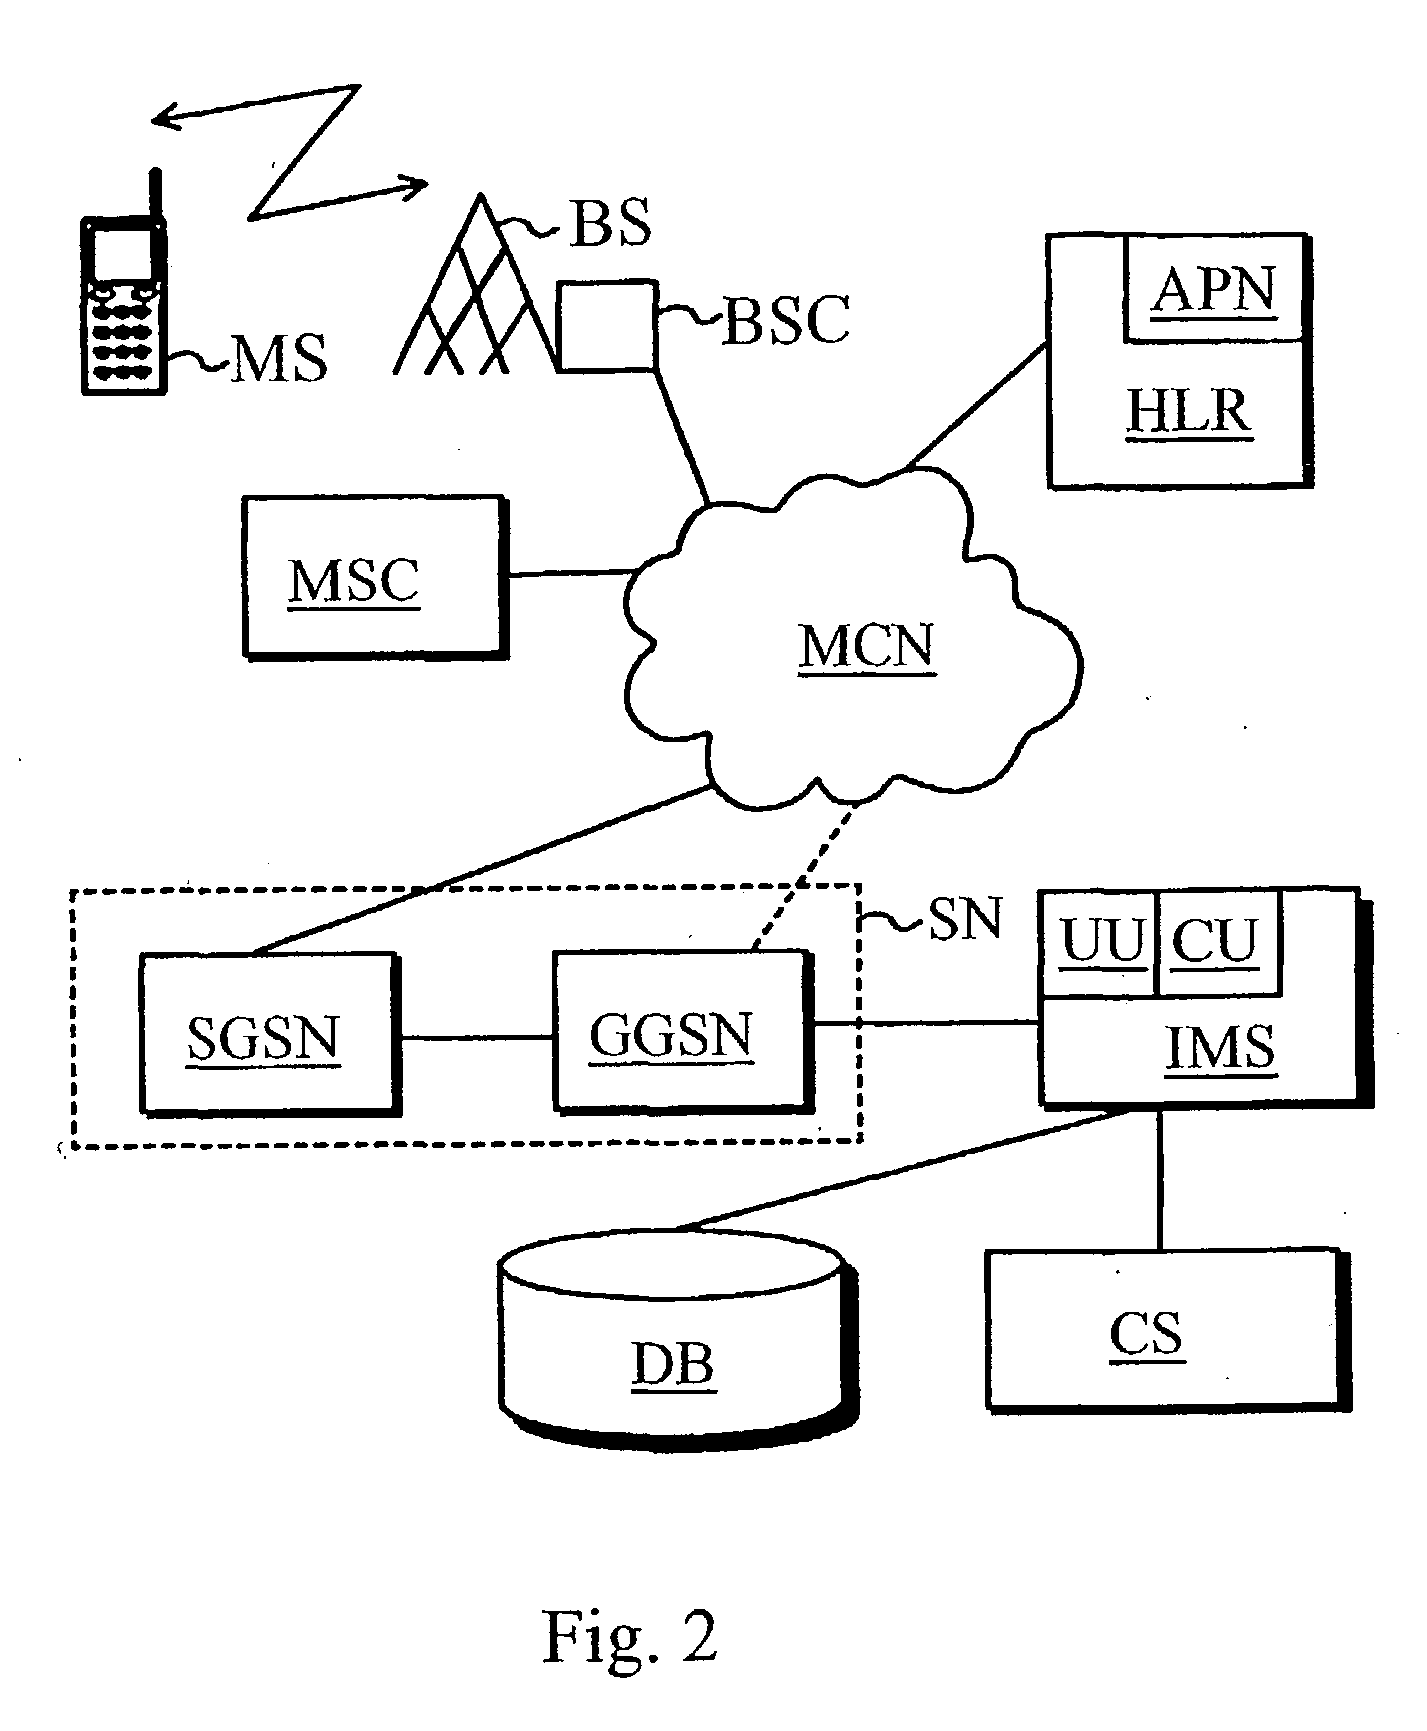 Prepaid service in a packet-switched mobile communication network